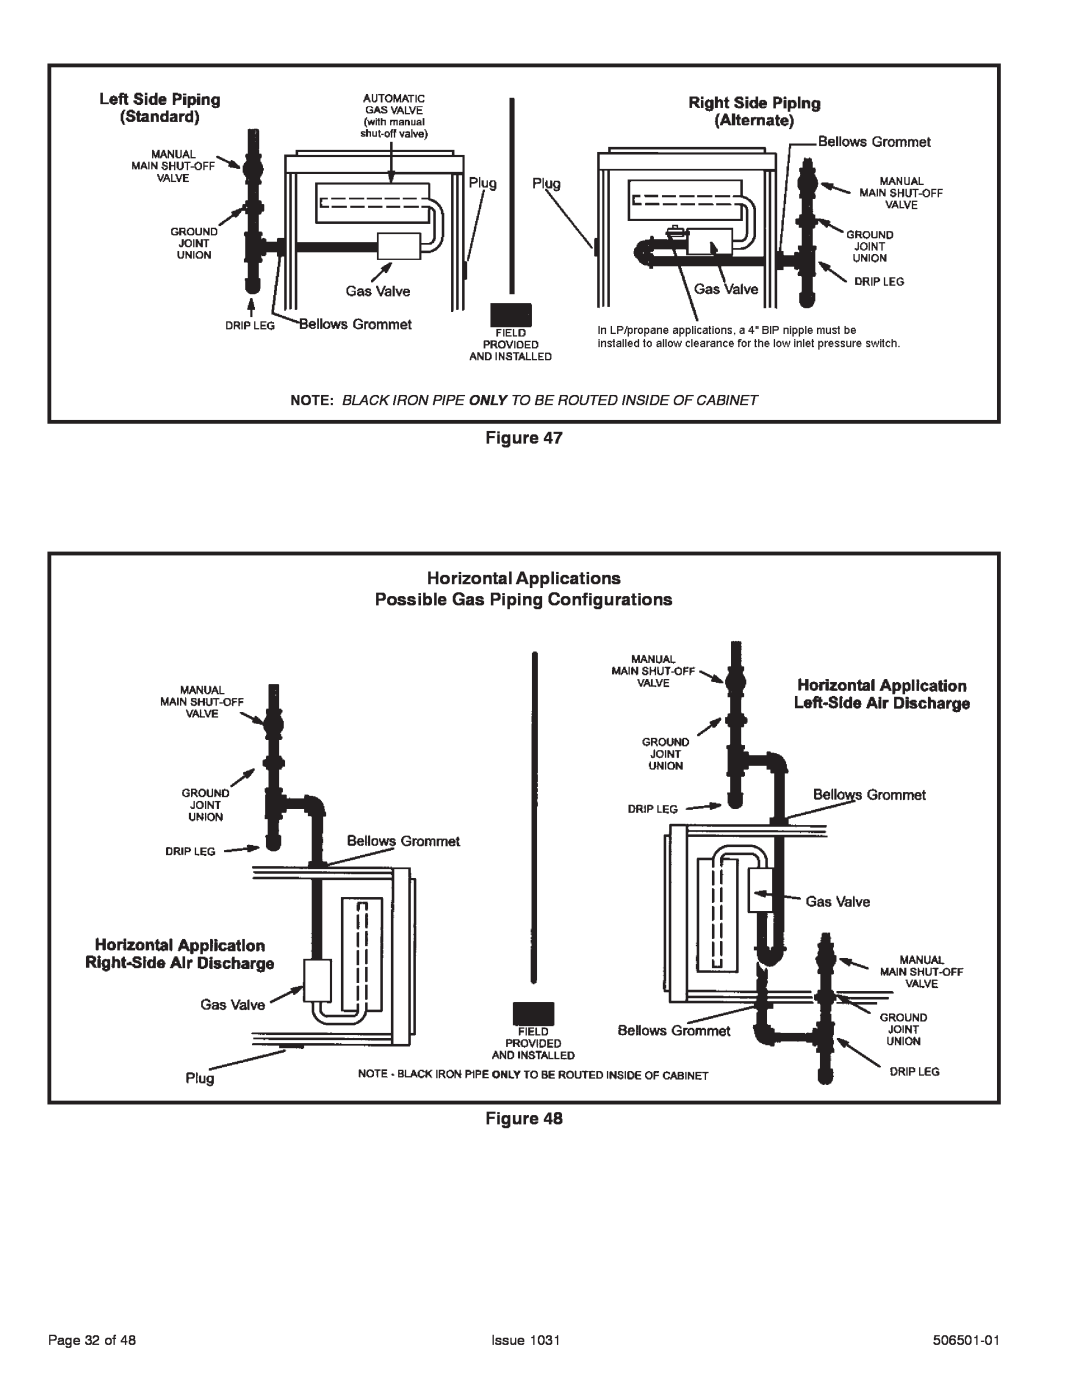 Allied Air Enterprises A95UH Figure Horizontal Applications, Possible Gas Piping Configurations Figure, Page 32 of, Issue 